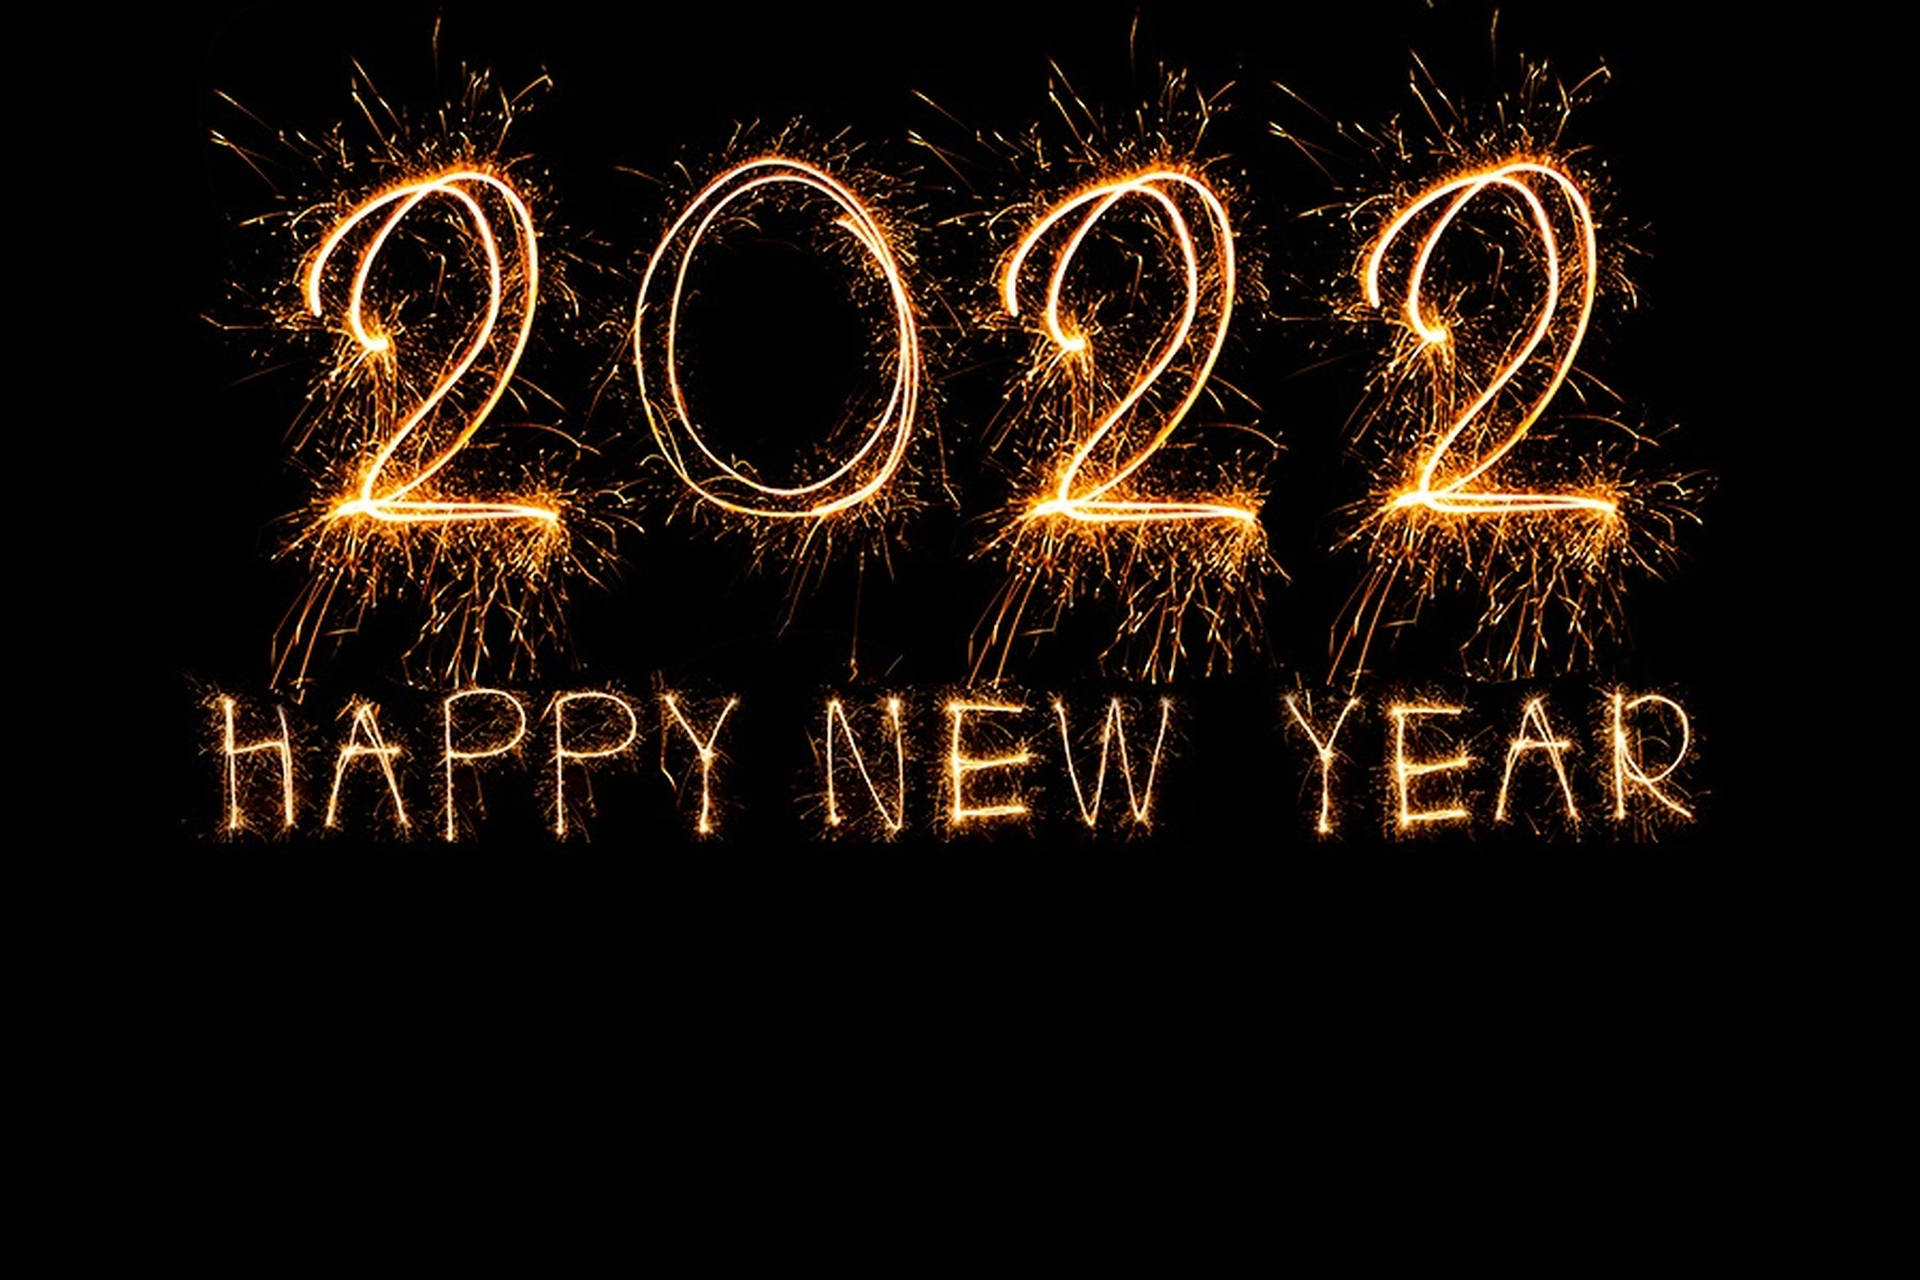 Happy New Year 2022 Sparklers Wallpaper